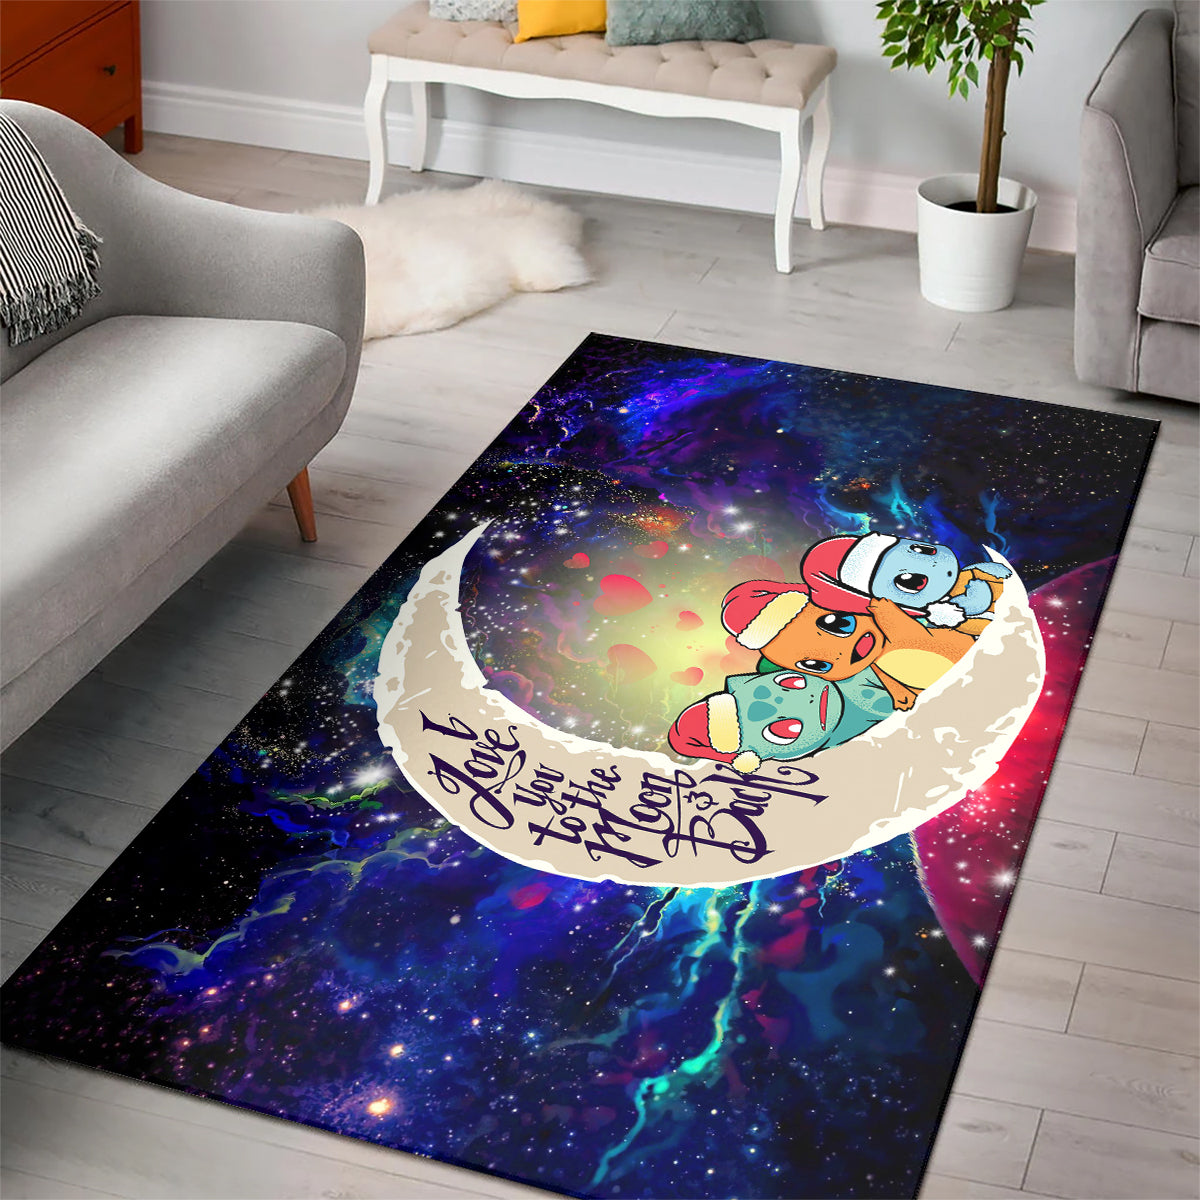 Pokemon Friends Gen 1 Love You To The Moon Galaxy Carpet Rug Home Room Decor